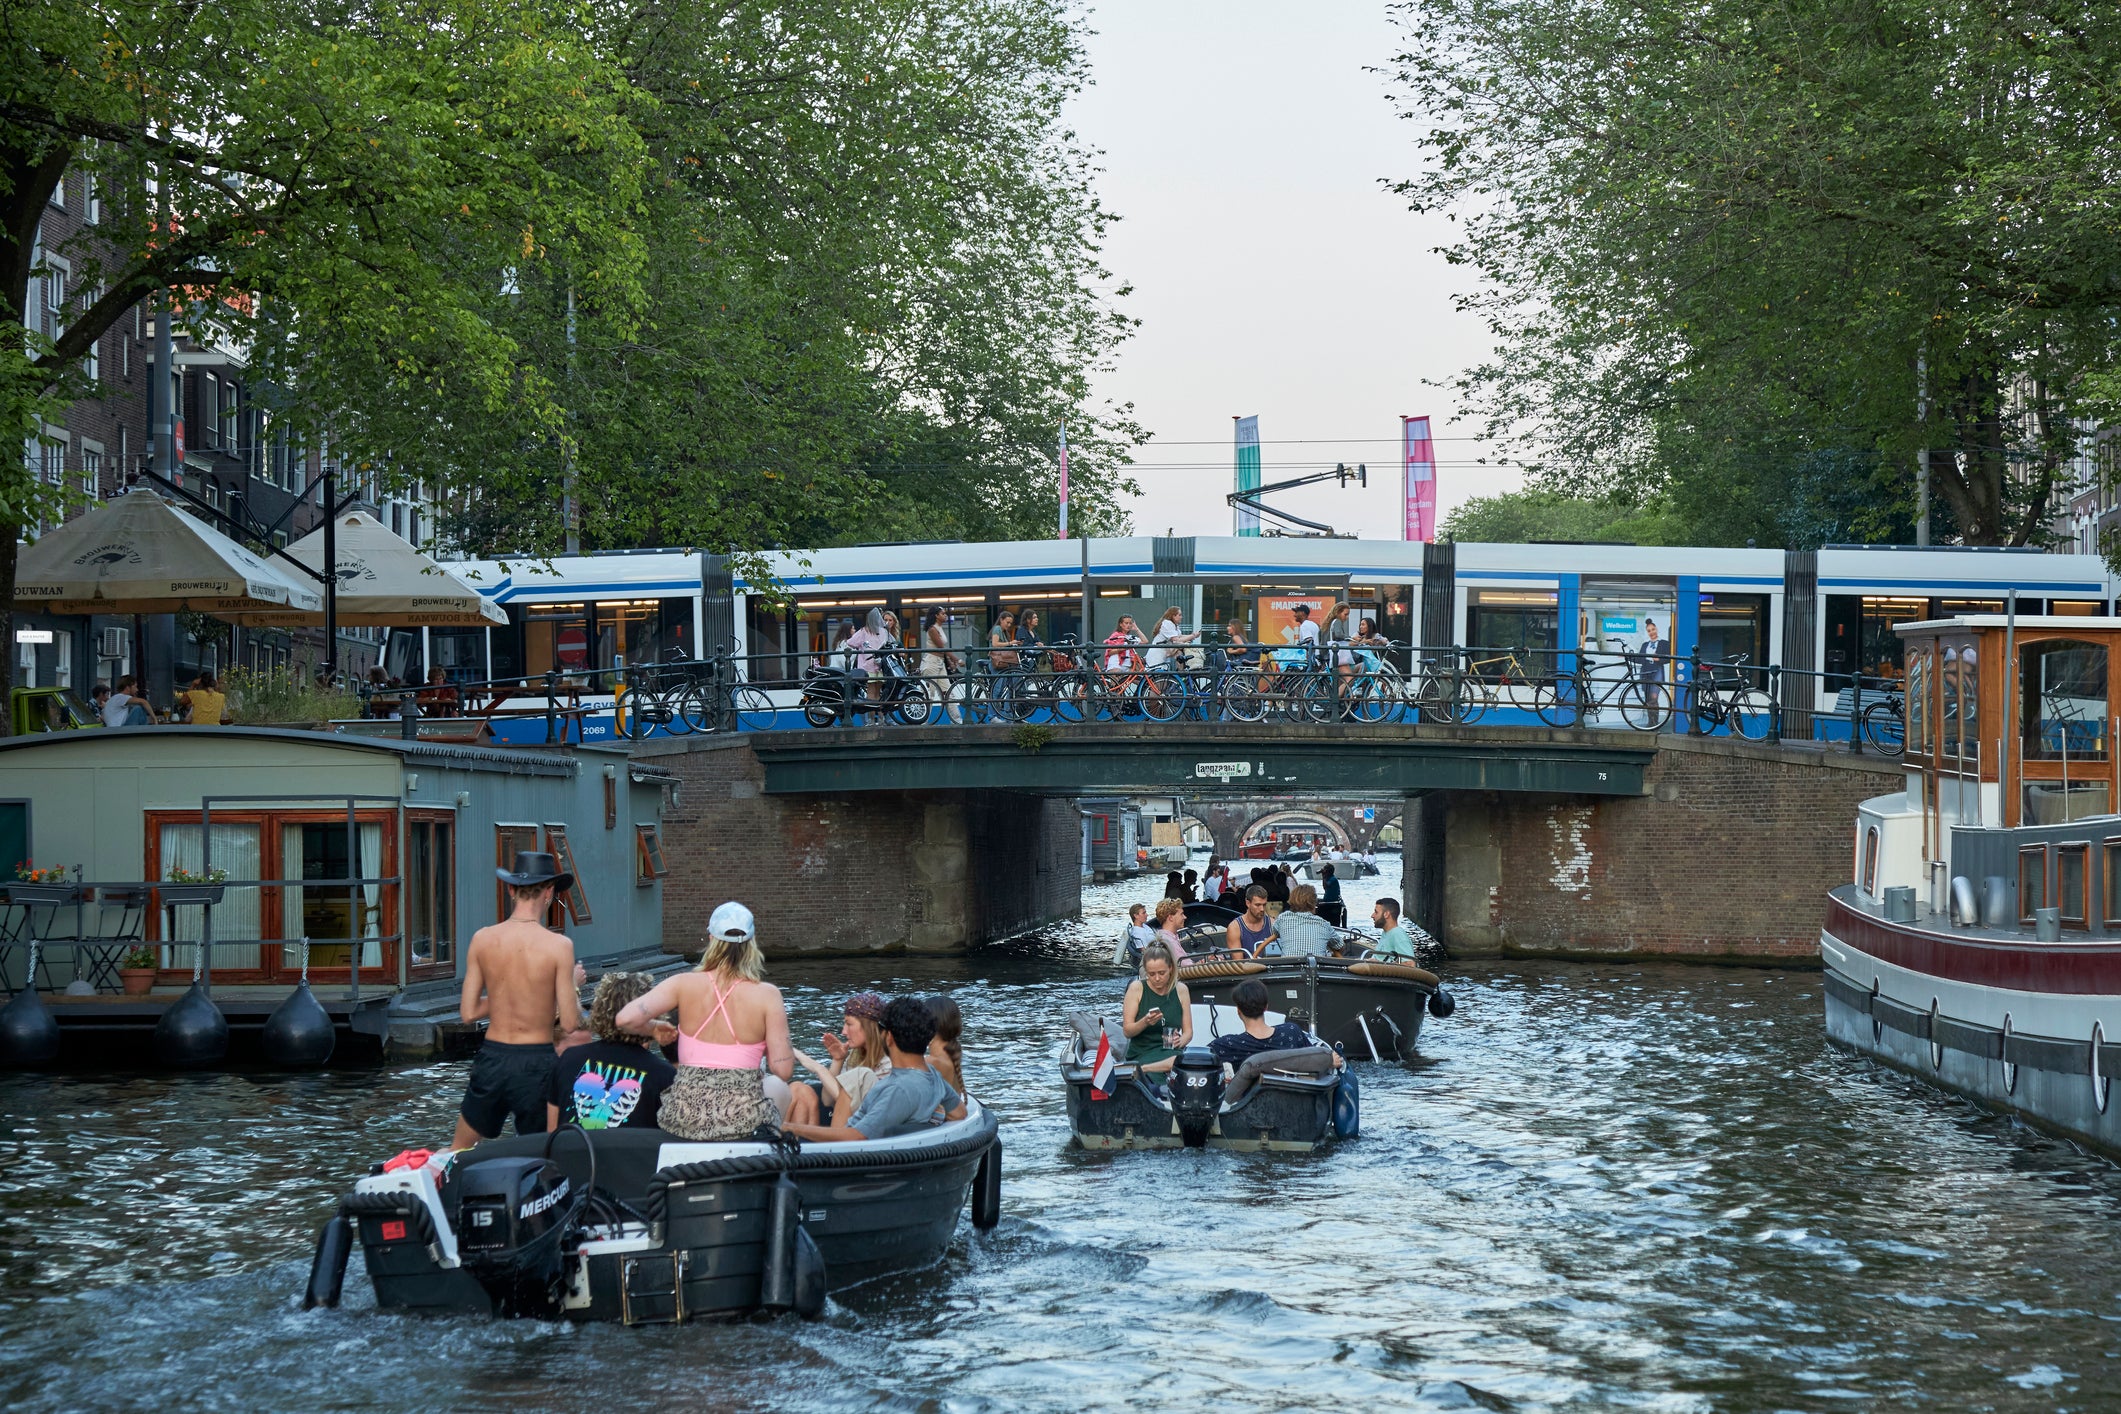 Thinking of a ‘messy weekend’ in Amsterdam? Think again